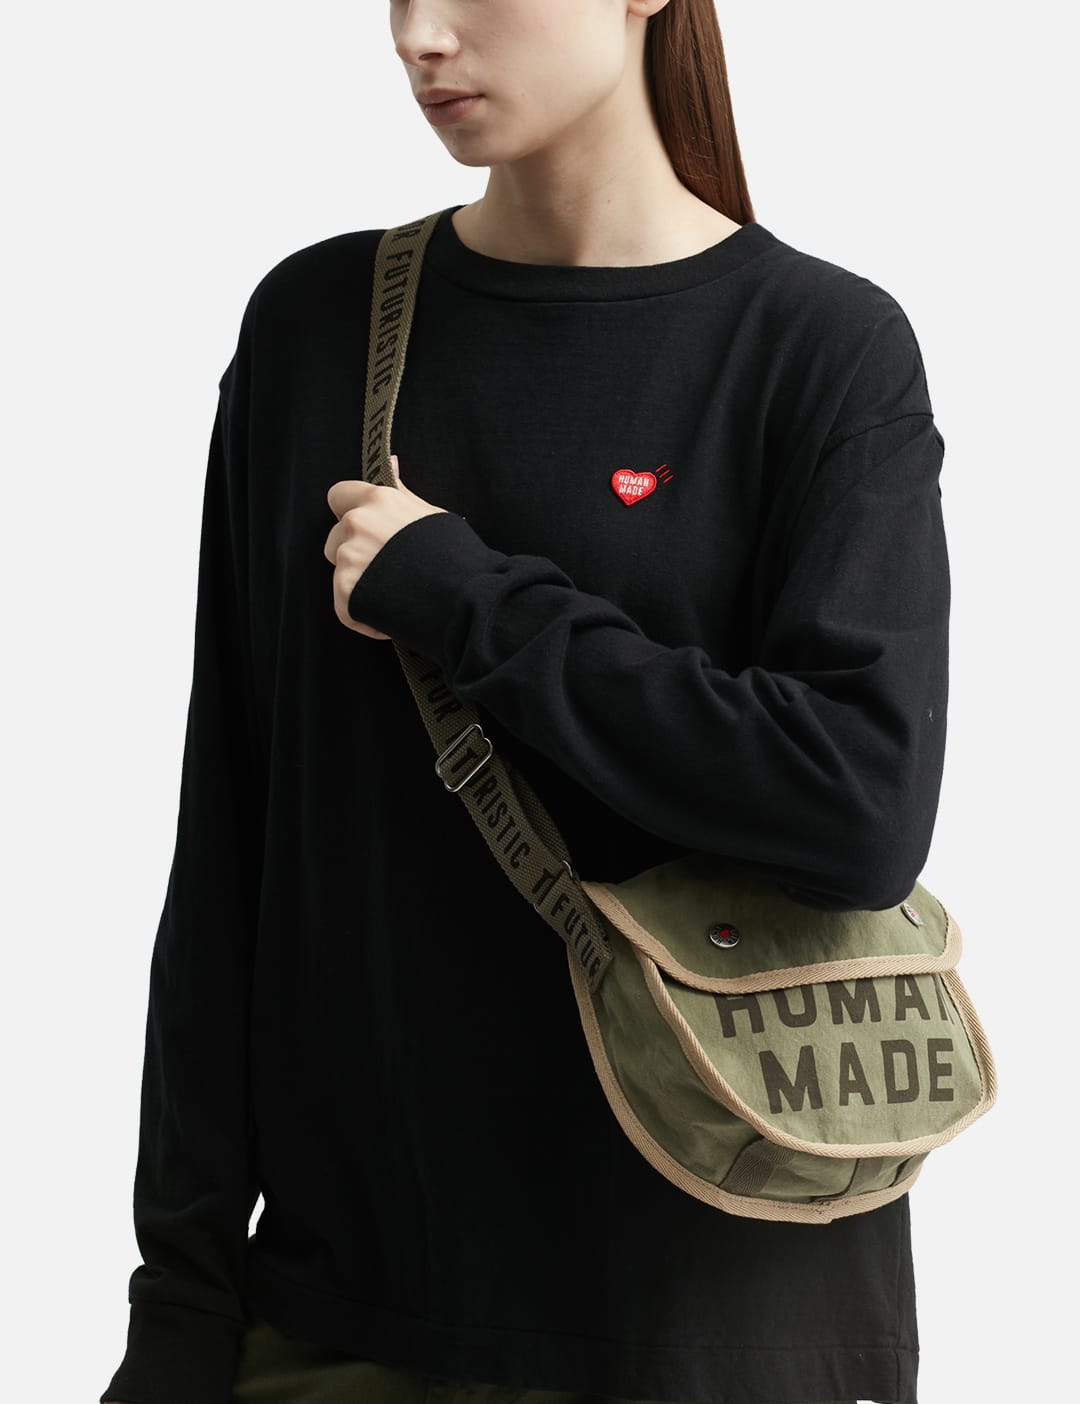 Human Made - Small Tool Bag | HBX - Globally Curated Fashion and